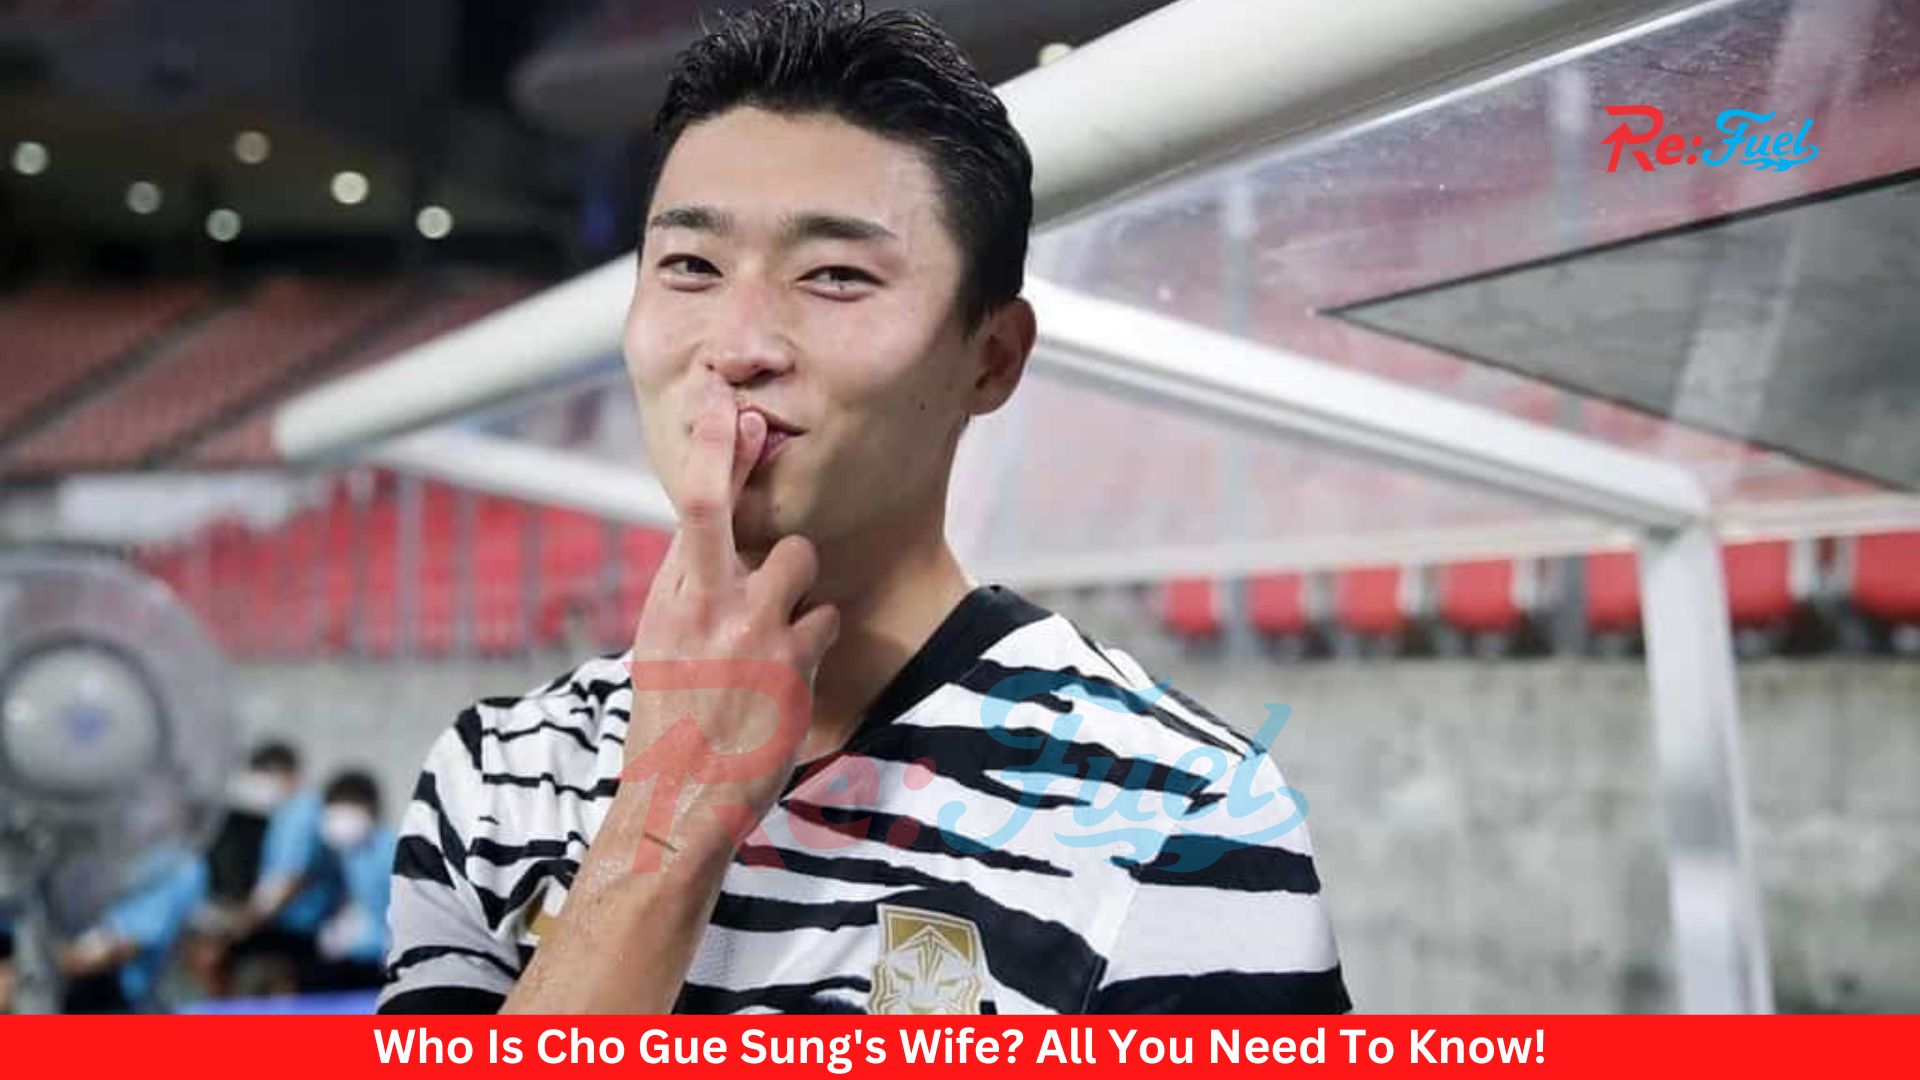 Who Is Cho Gue Sung's Wife? Is He Dating Anyone?